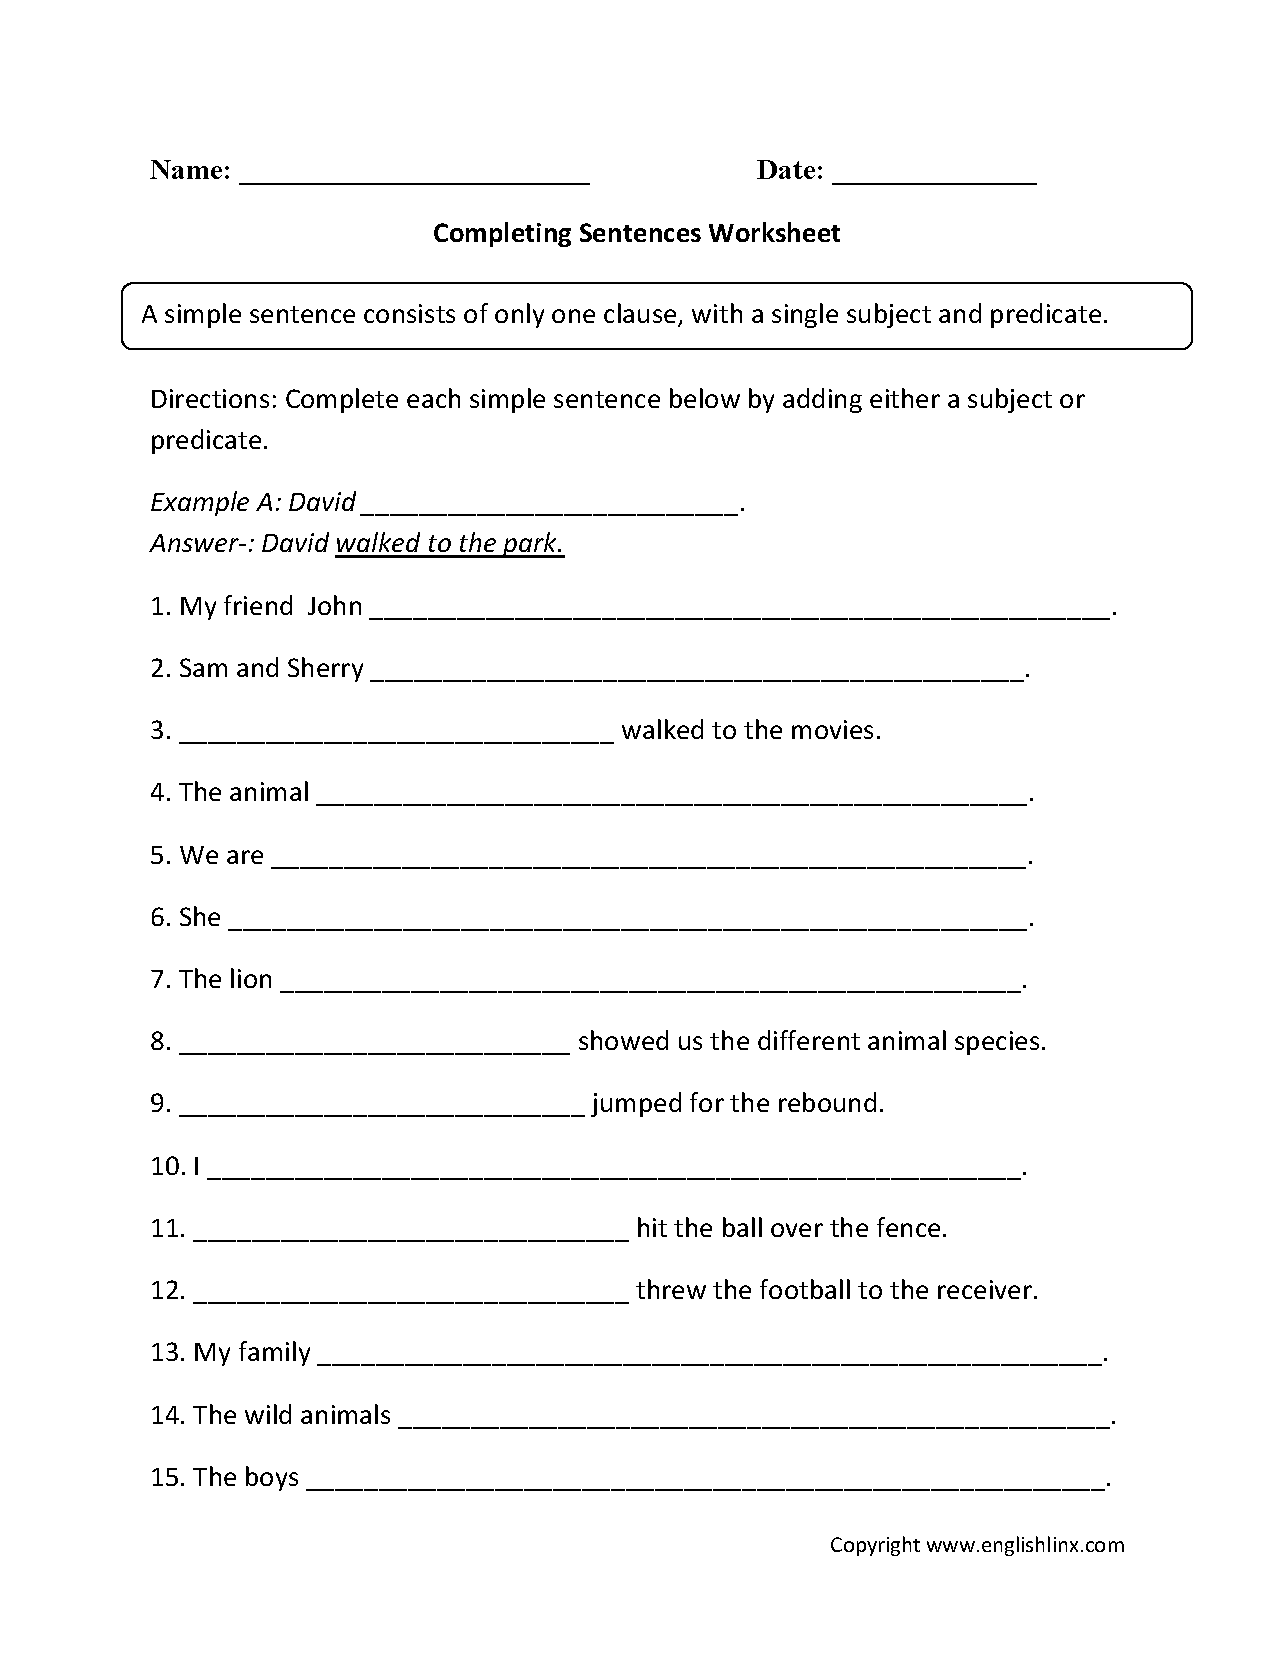 20 Best Images of Sentence Structure Worksheets 7th Grade - Simple